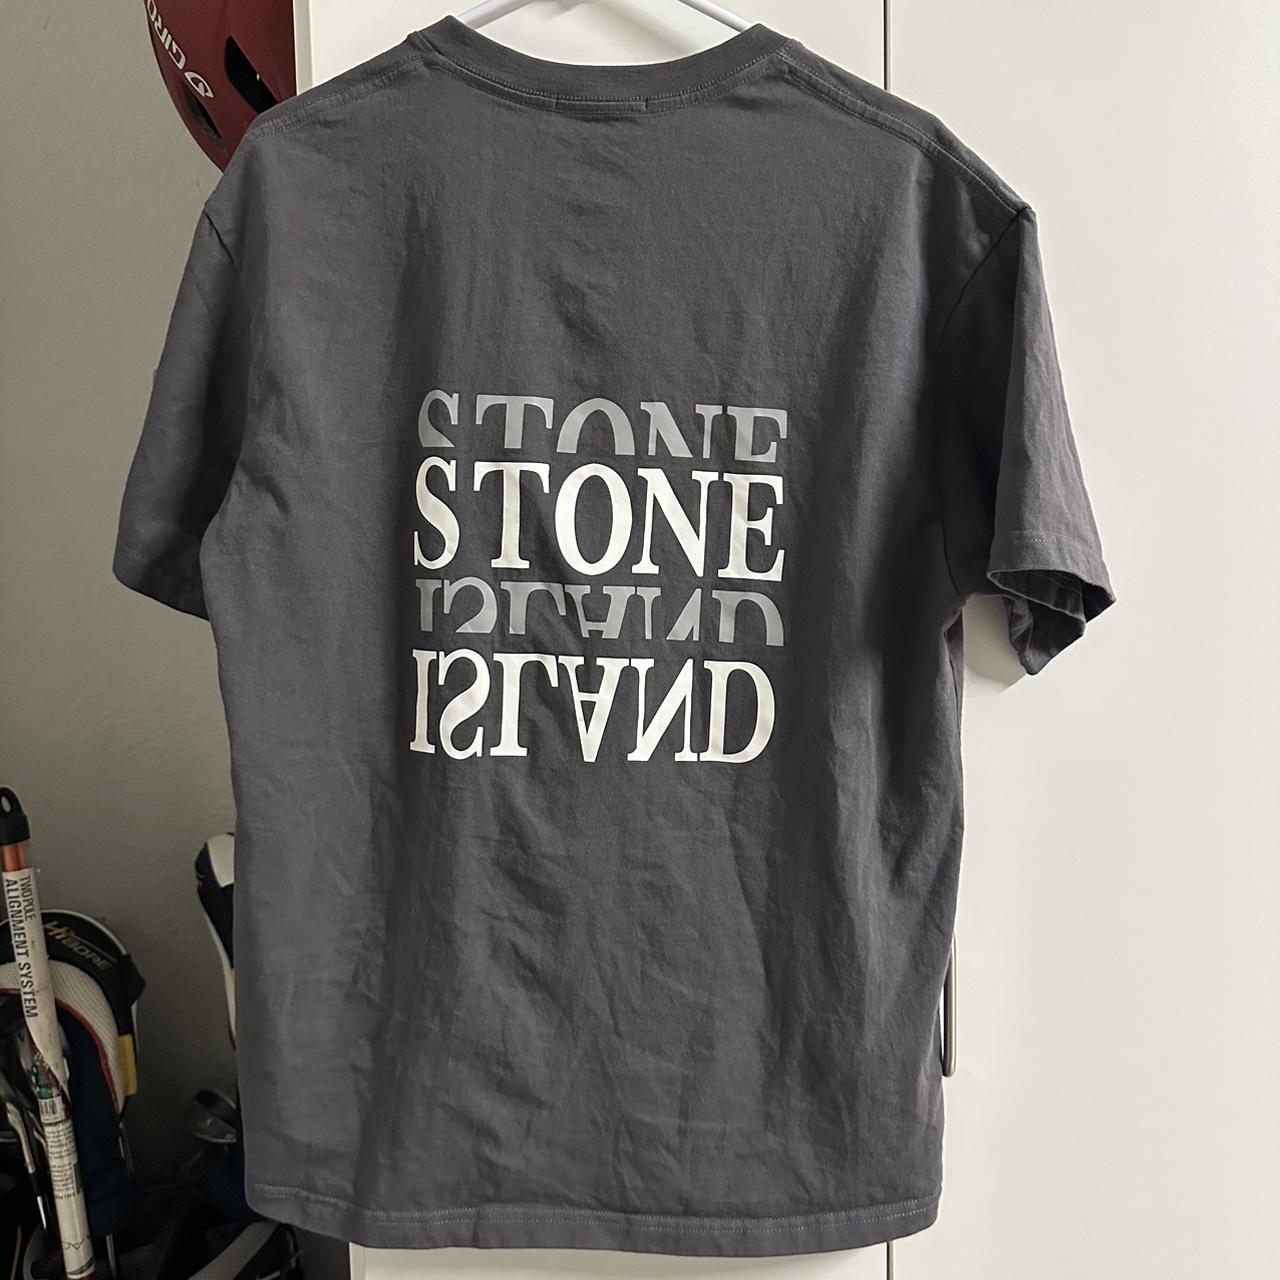 Stone Island Men's Grey and Silver T-shirt (3)